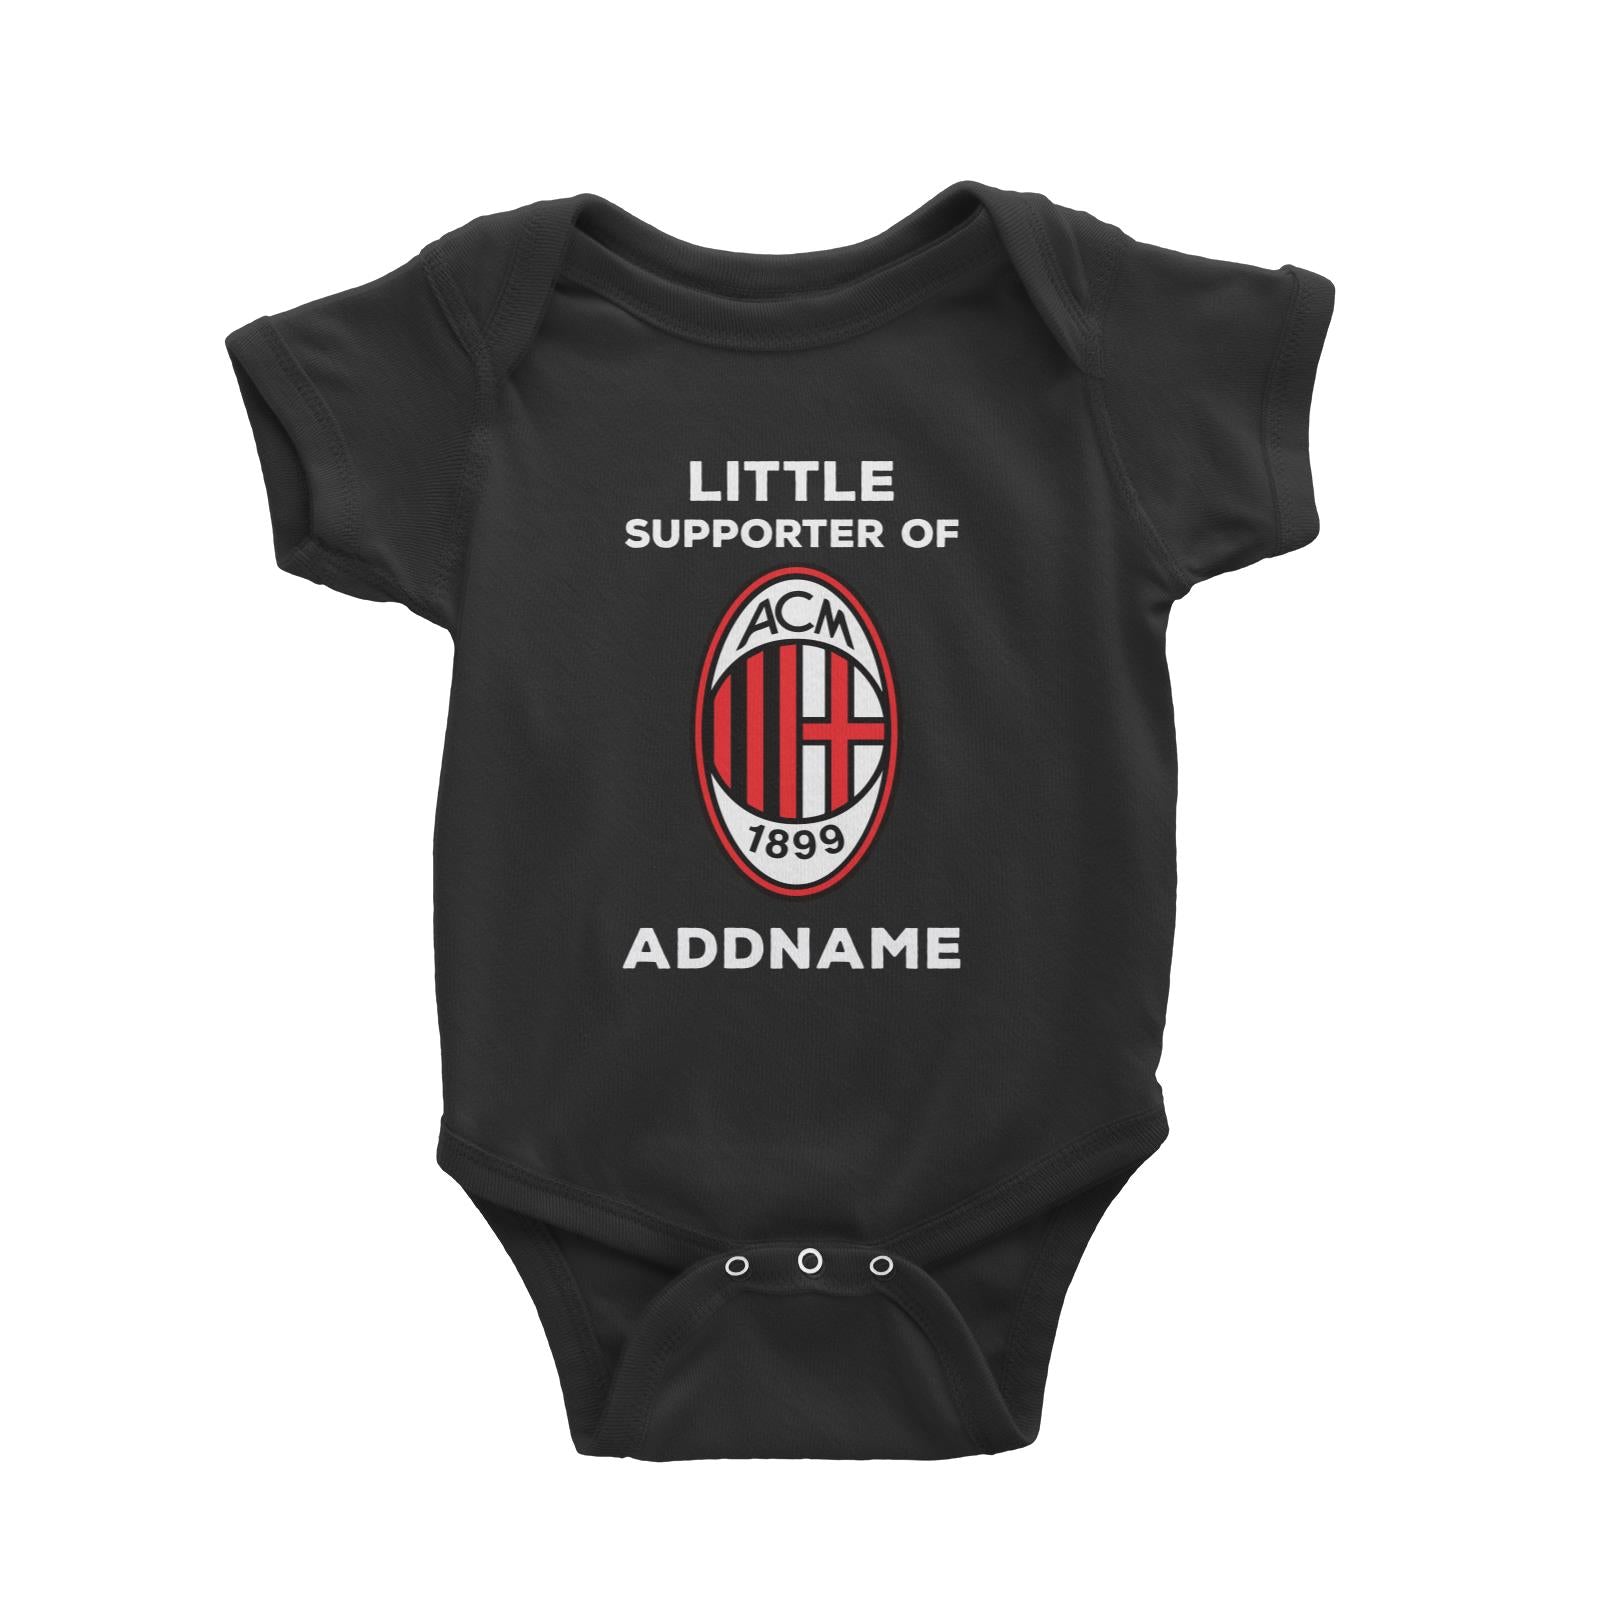 AC Milan Little Supporter Personalizable with Name Baby Romper